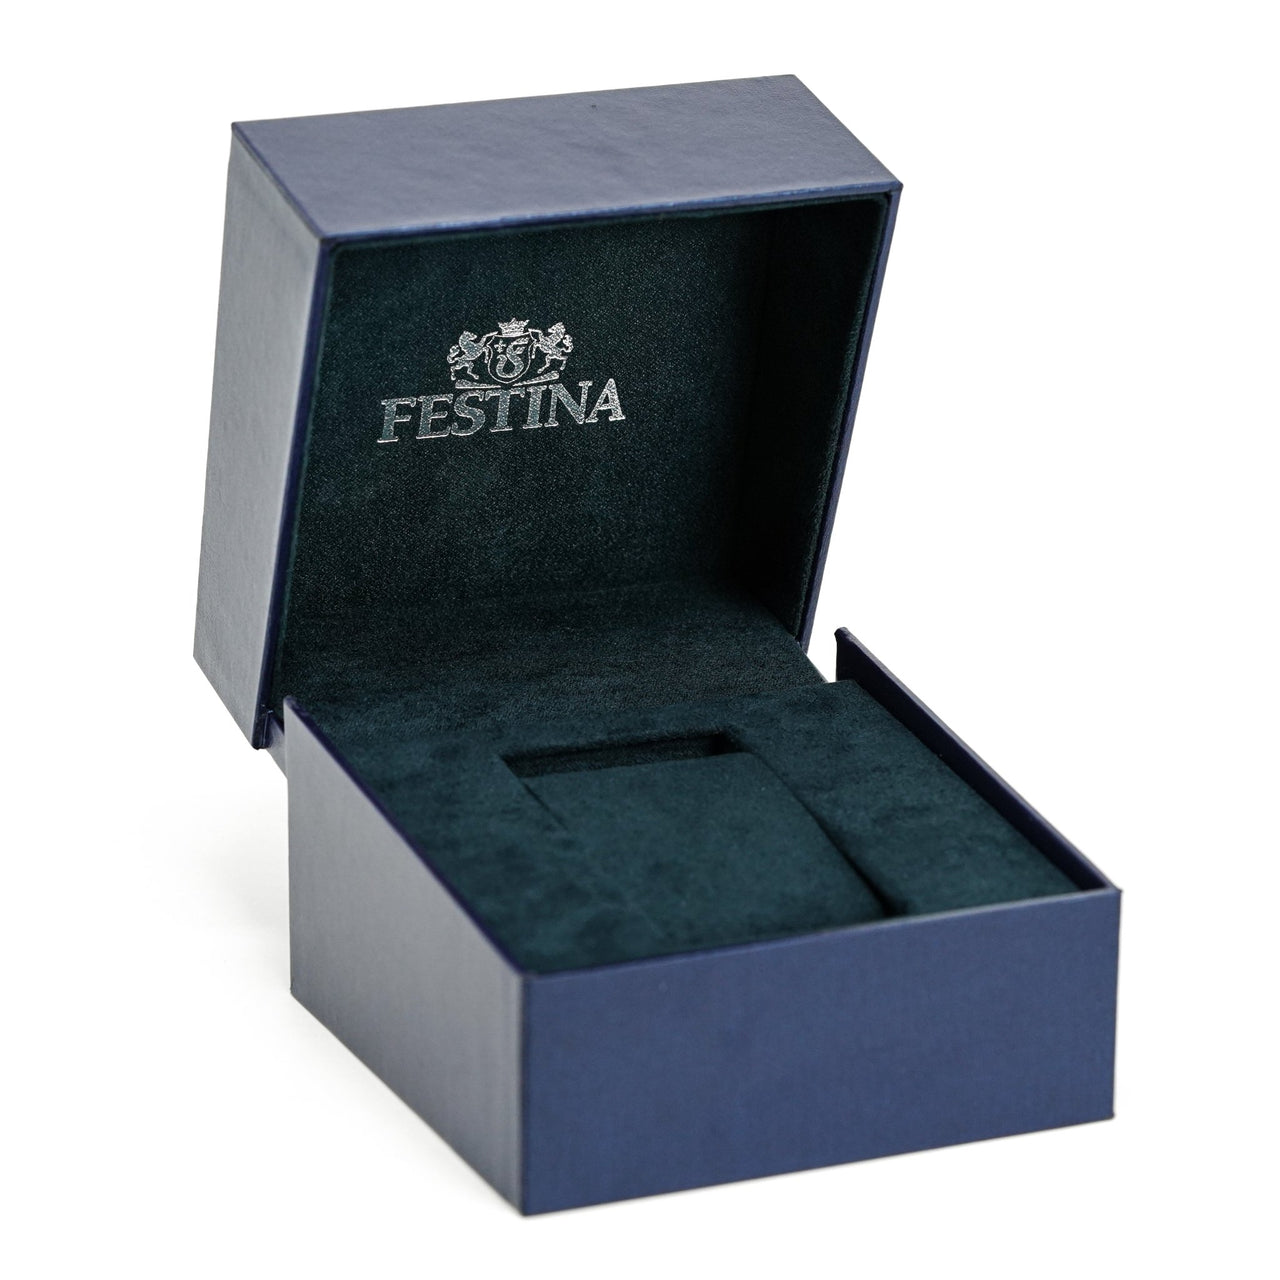 Festina Watch Black Blue Chrono Bike Stainless Steel F20448-5 - Watches & Crystals